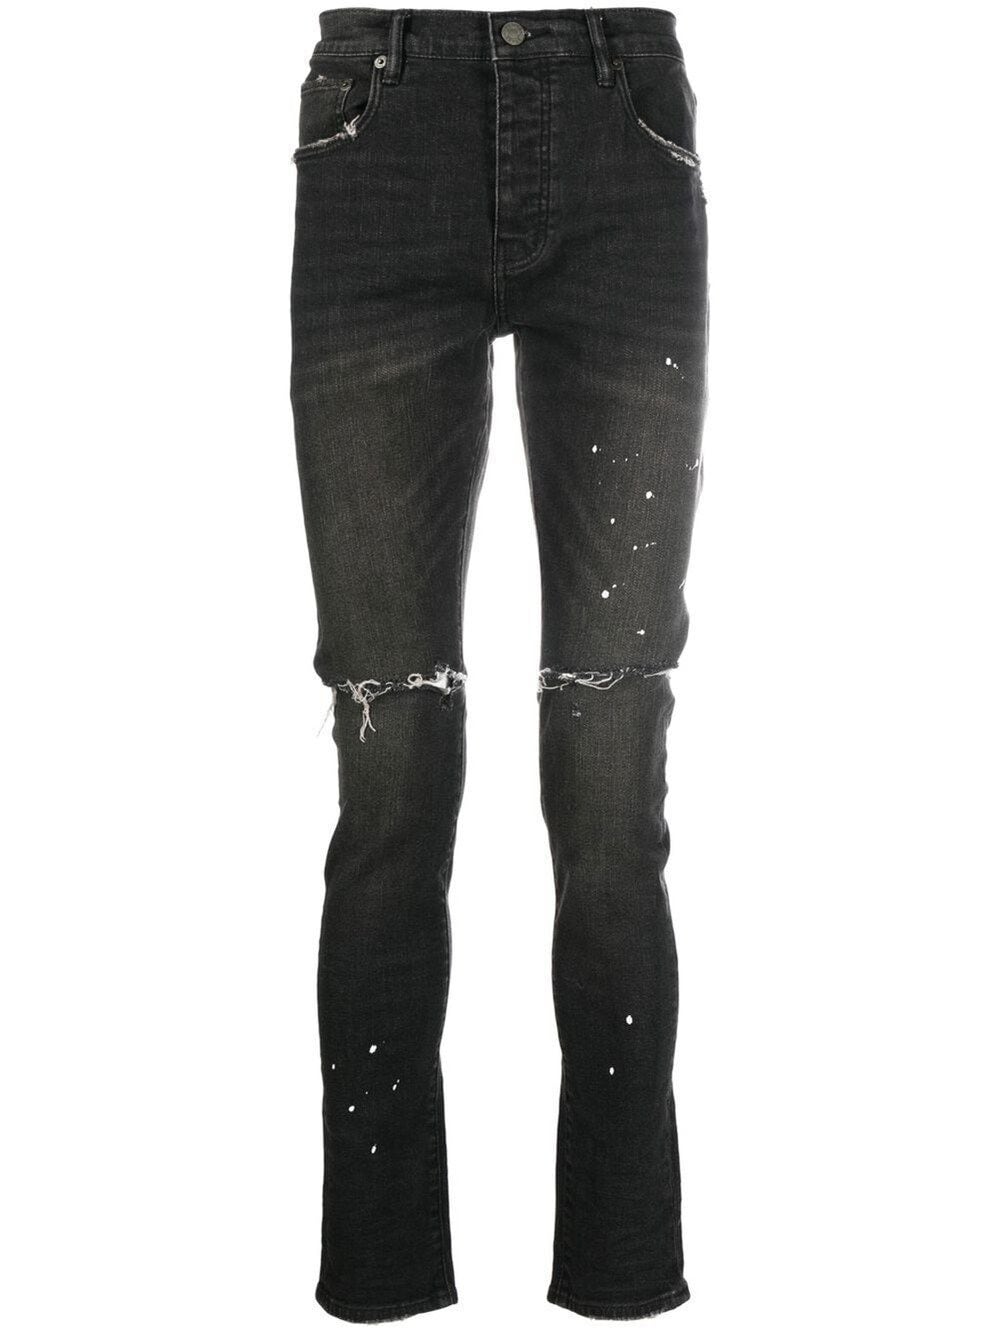 NEW Purple Brand Black and grey splice vintage personality fashion Frayed  jeans